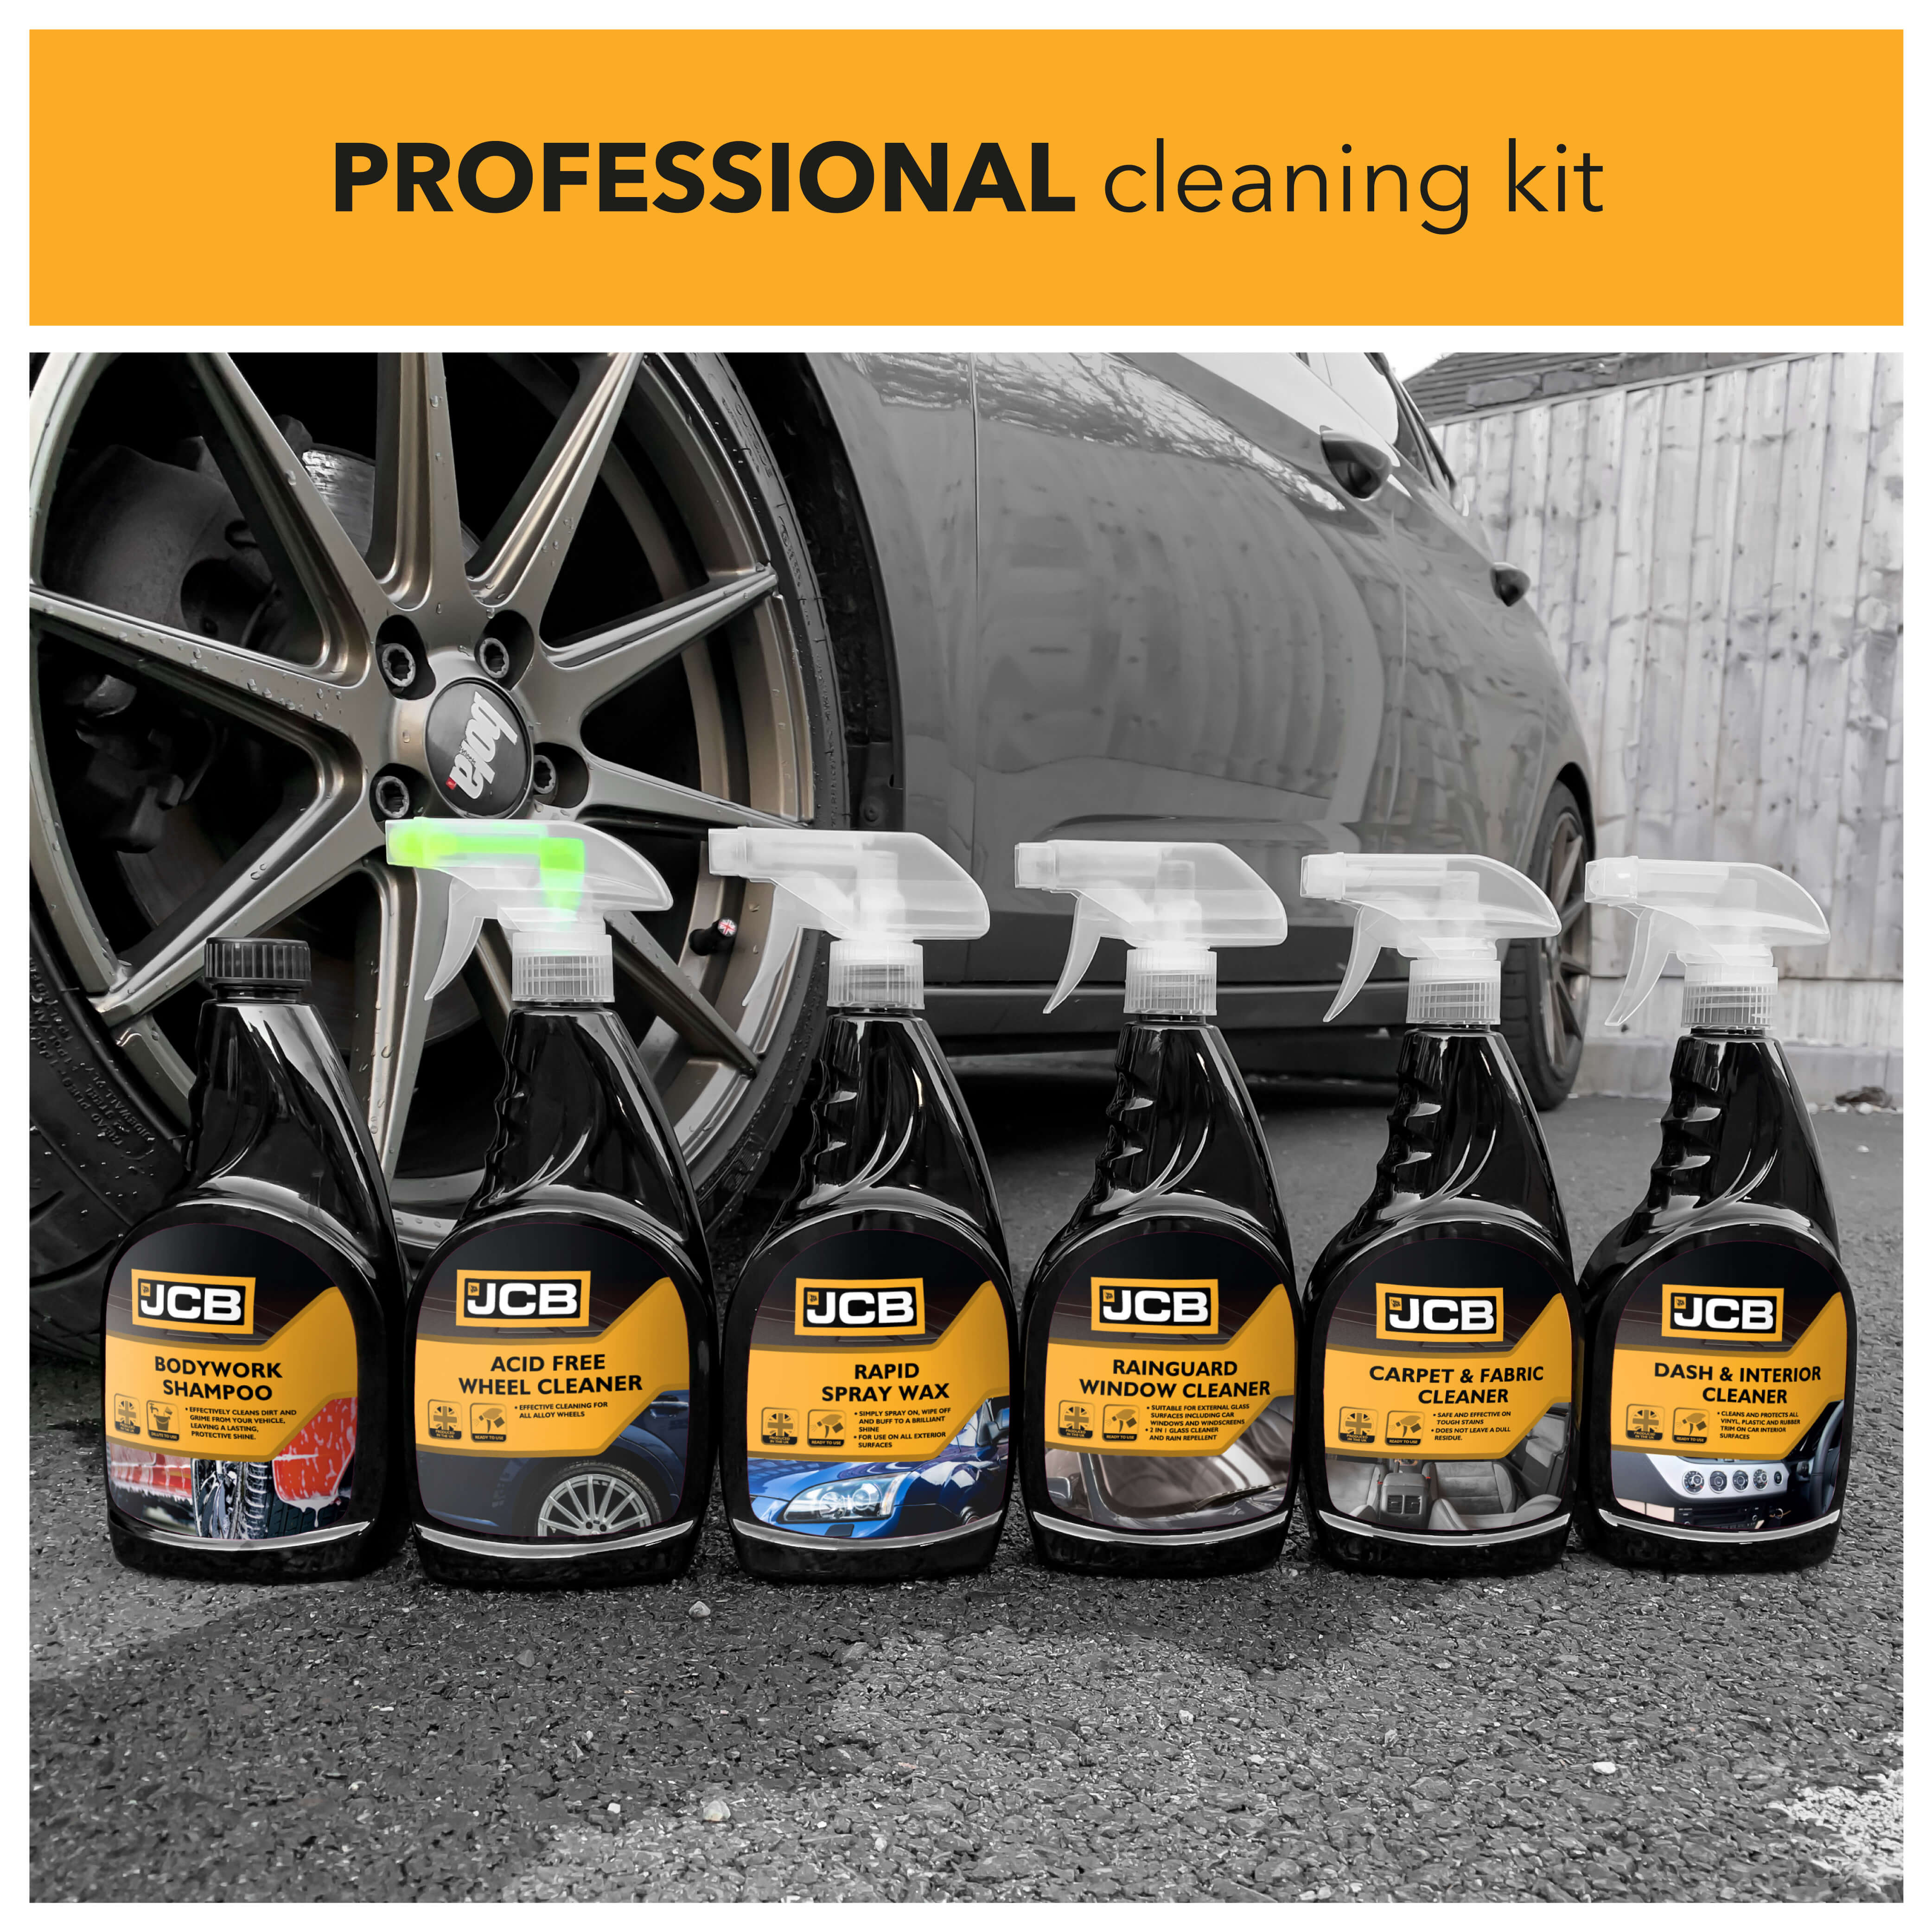 Professional cleaning kit